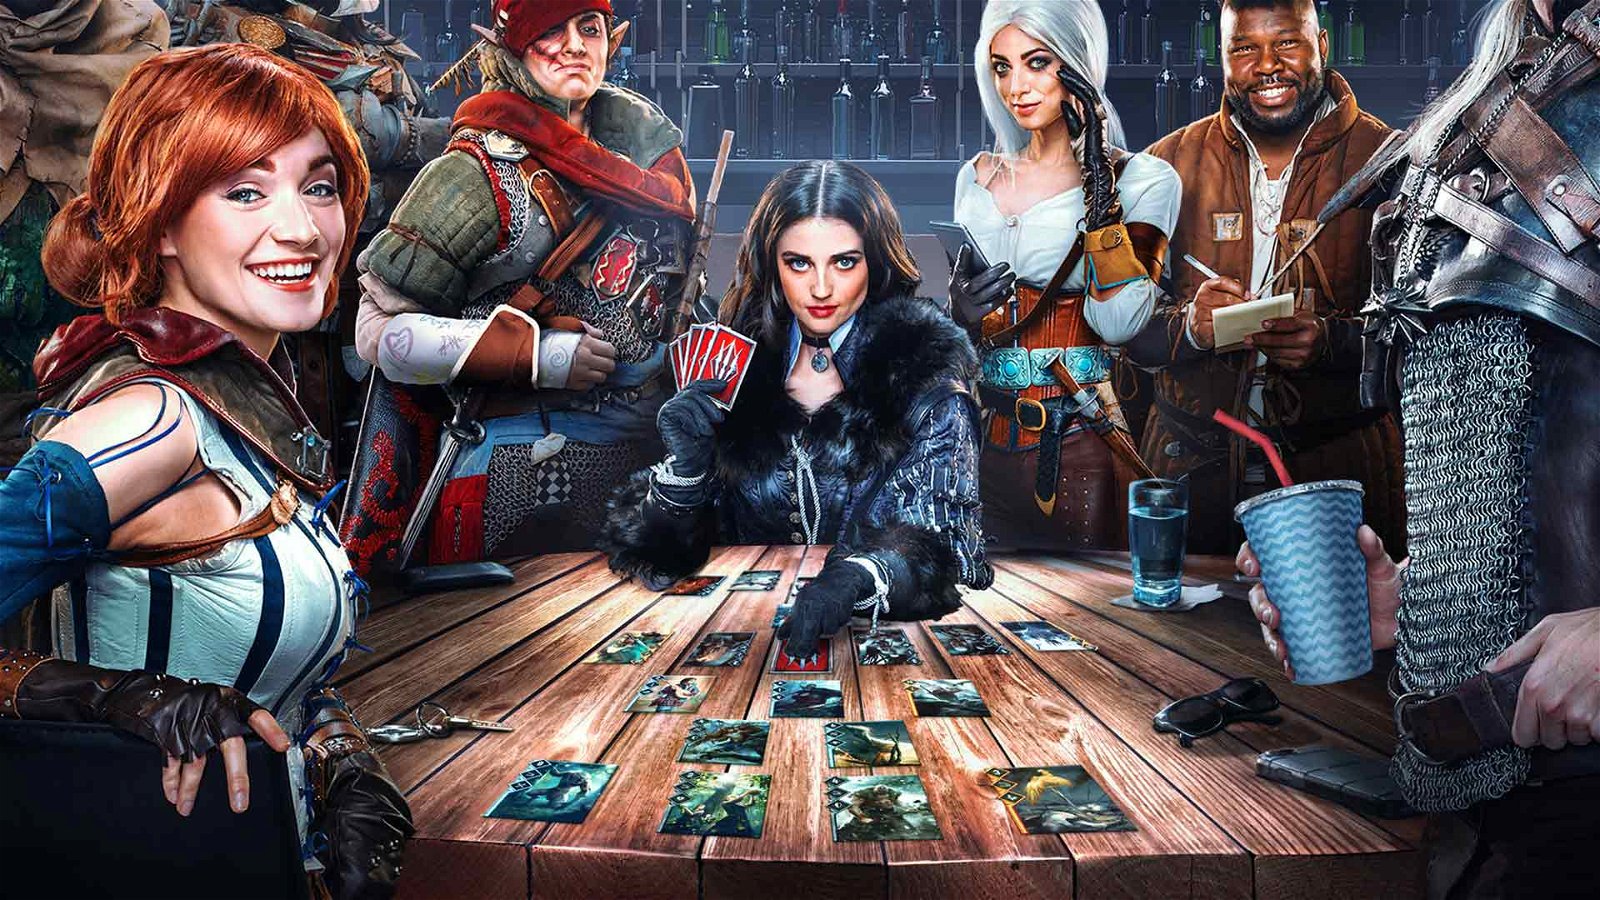 Gwent Might End Up Being My New Go-To Card Game 4